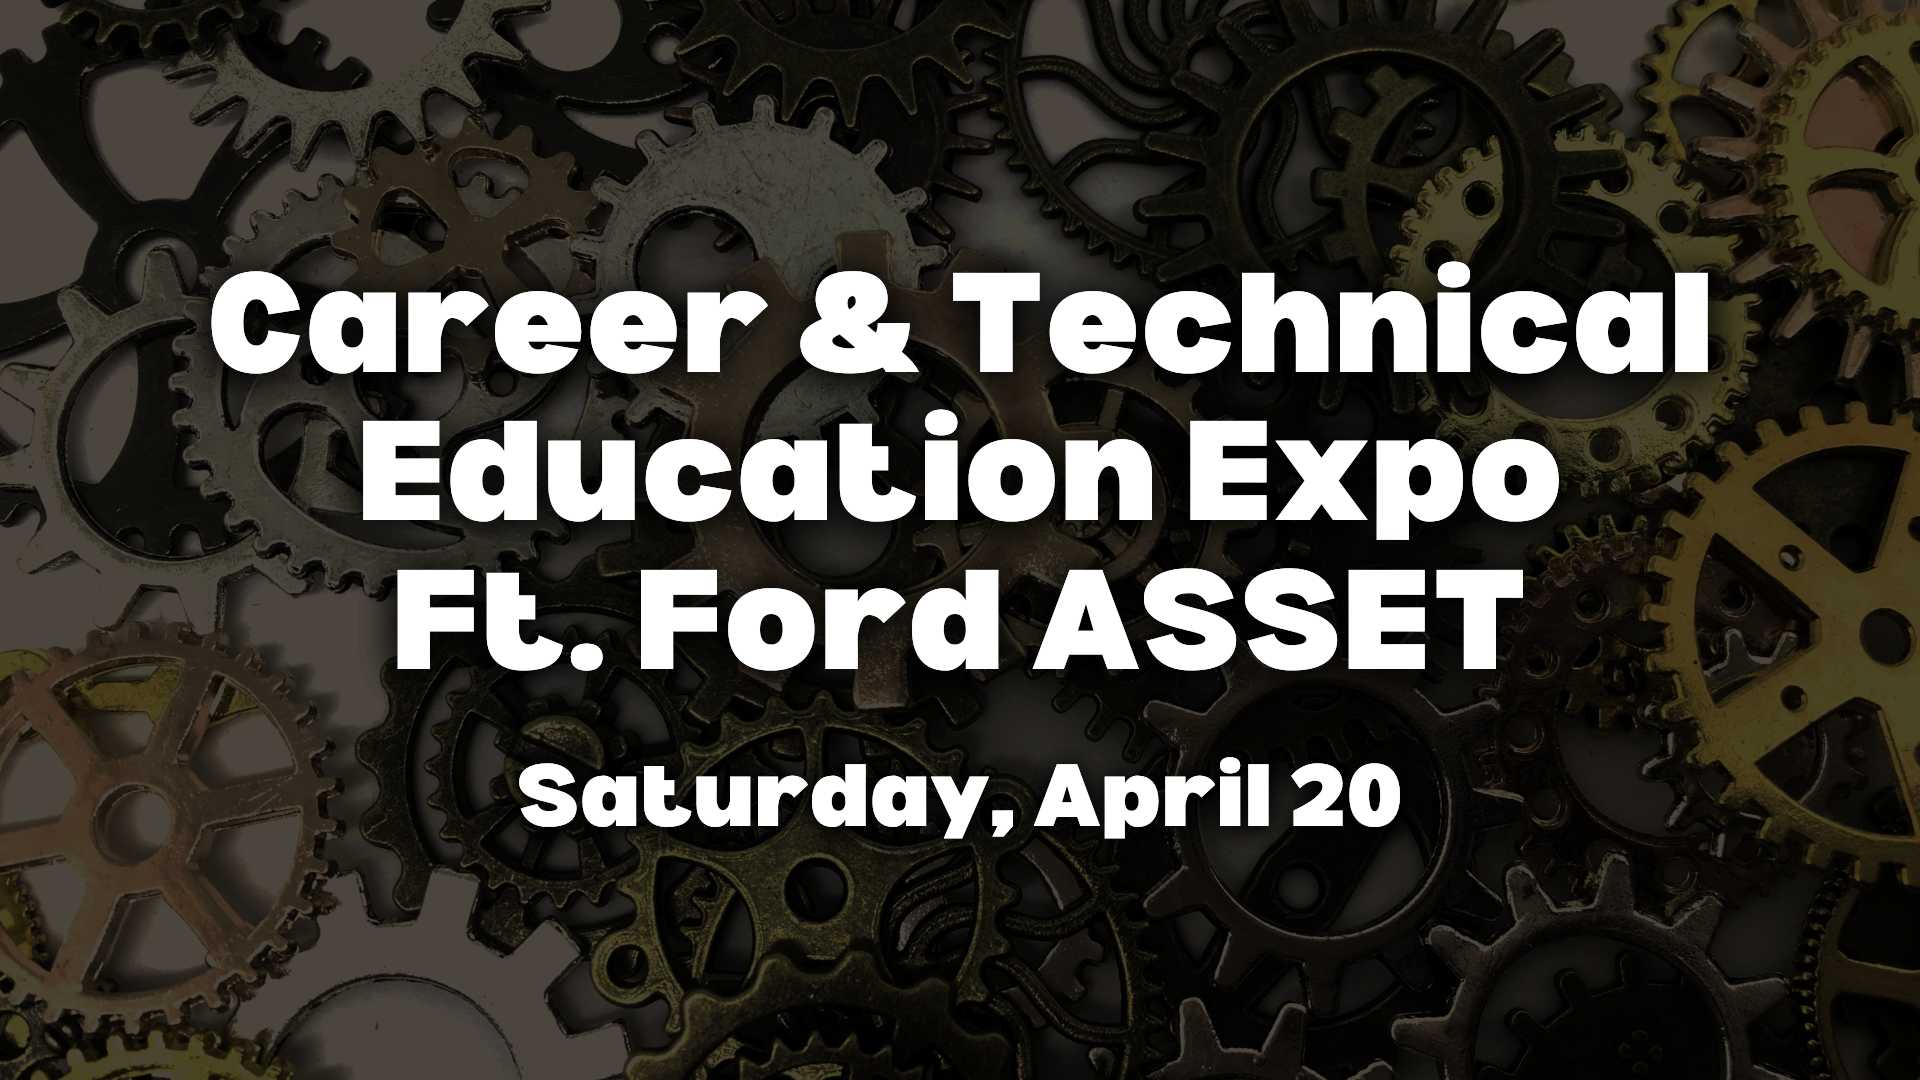 Career & Technical Education Expo Ft. Ford ASSET graphic